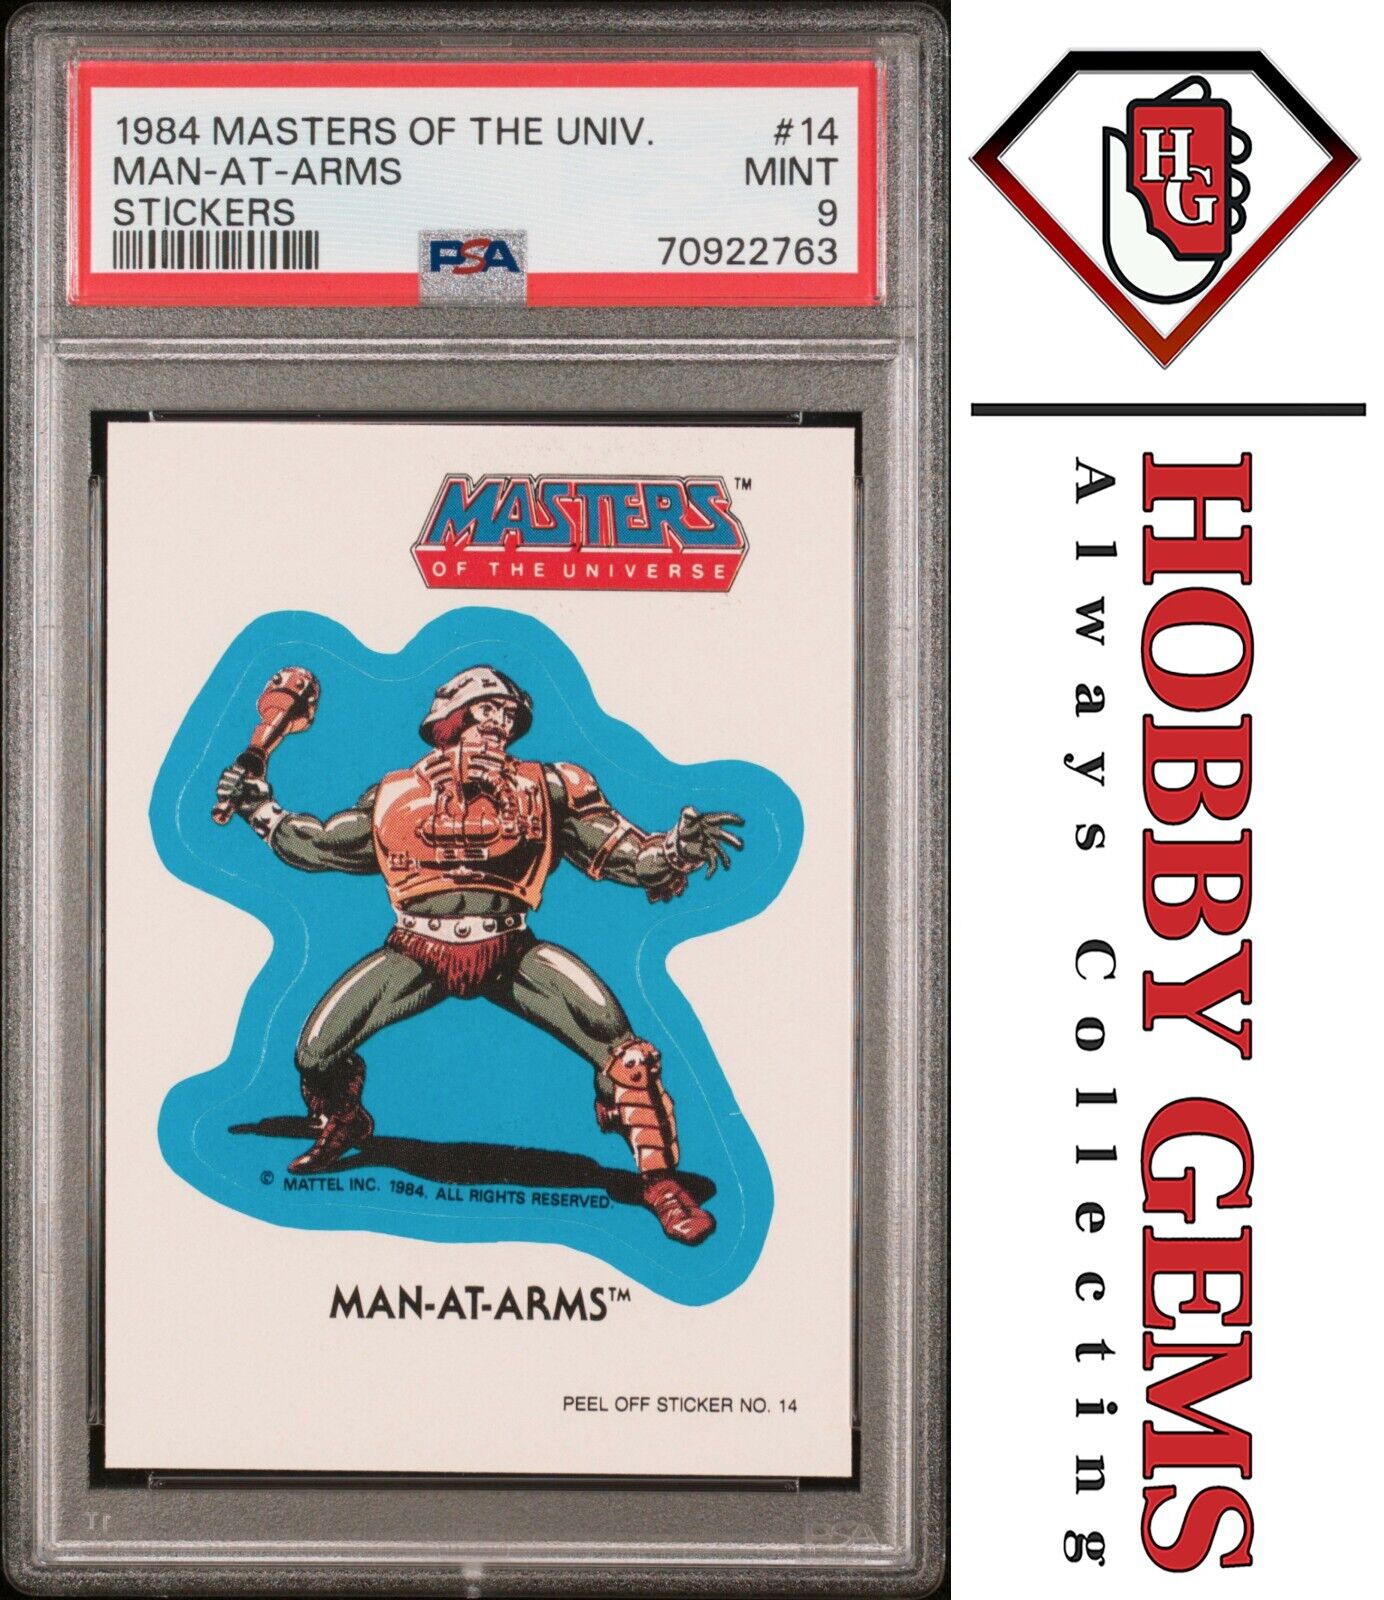 MAN-AT-ARMS PSA 9 1984 Masters of the Universe Sticker #14